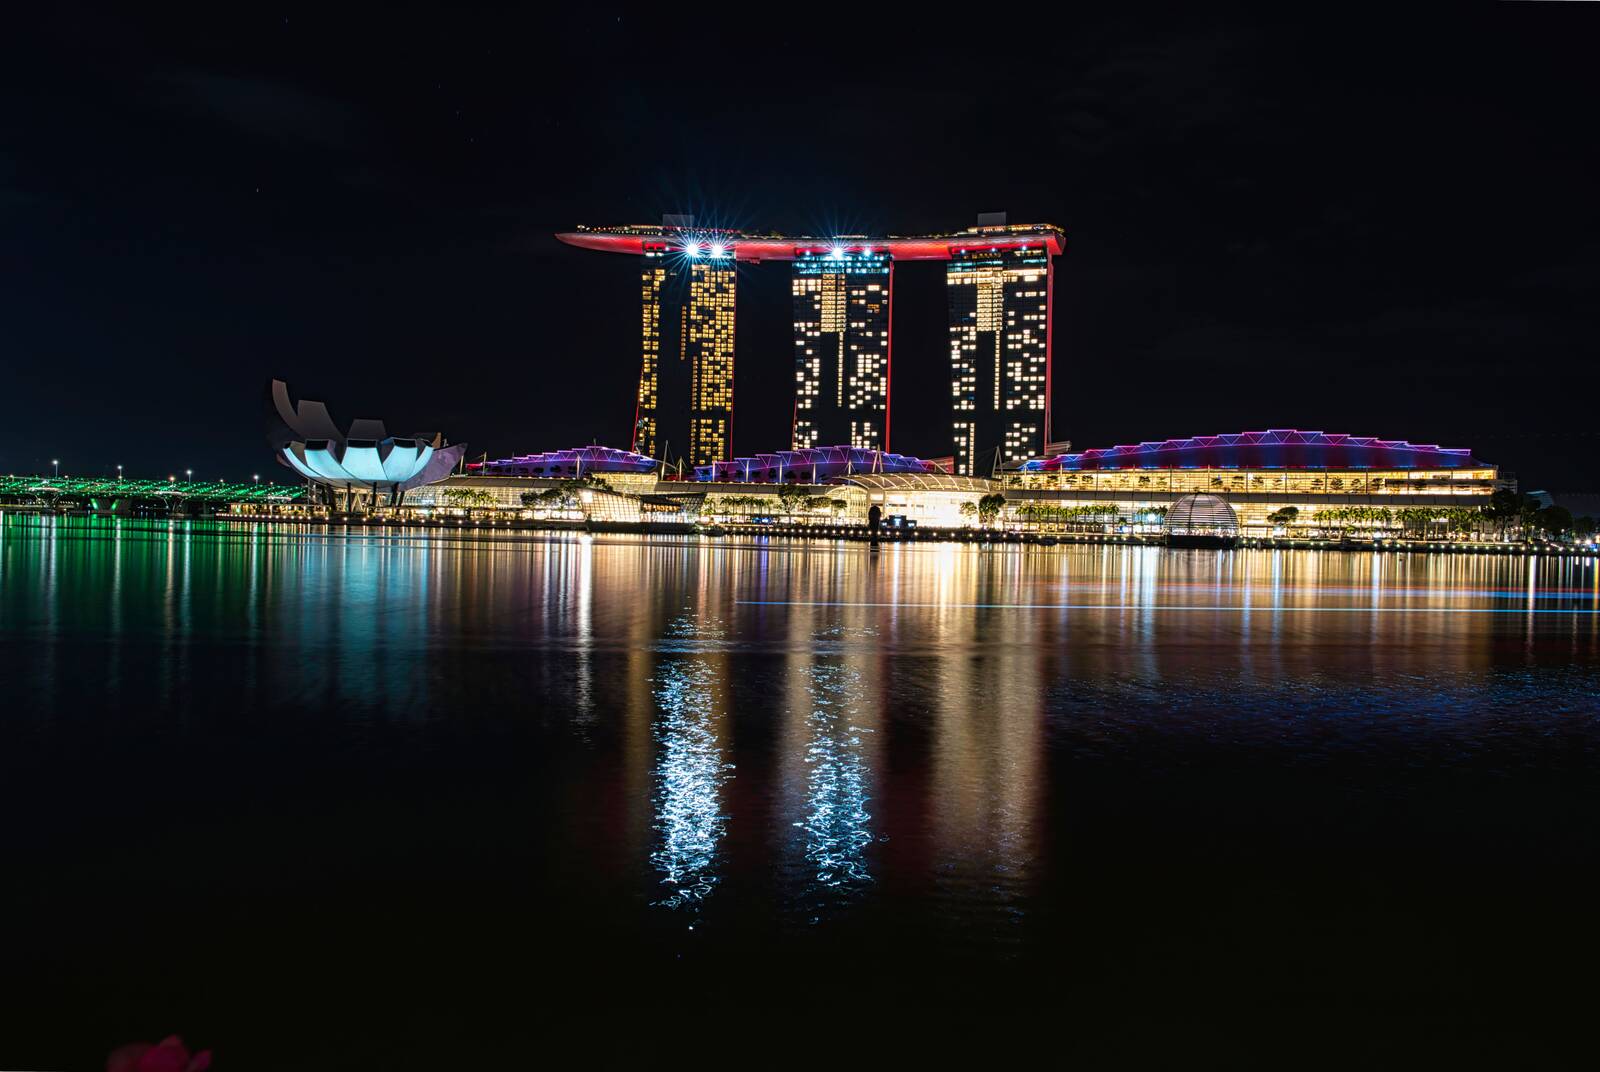 Image of Merlion Park by sing siva